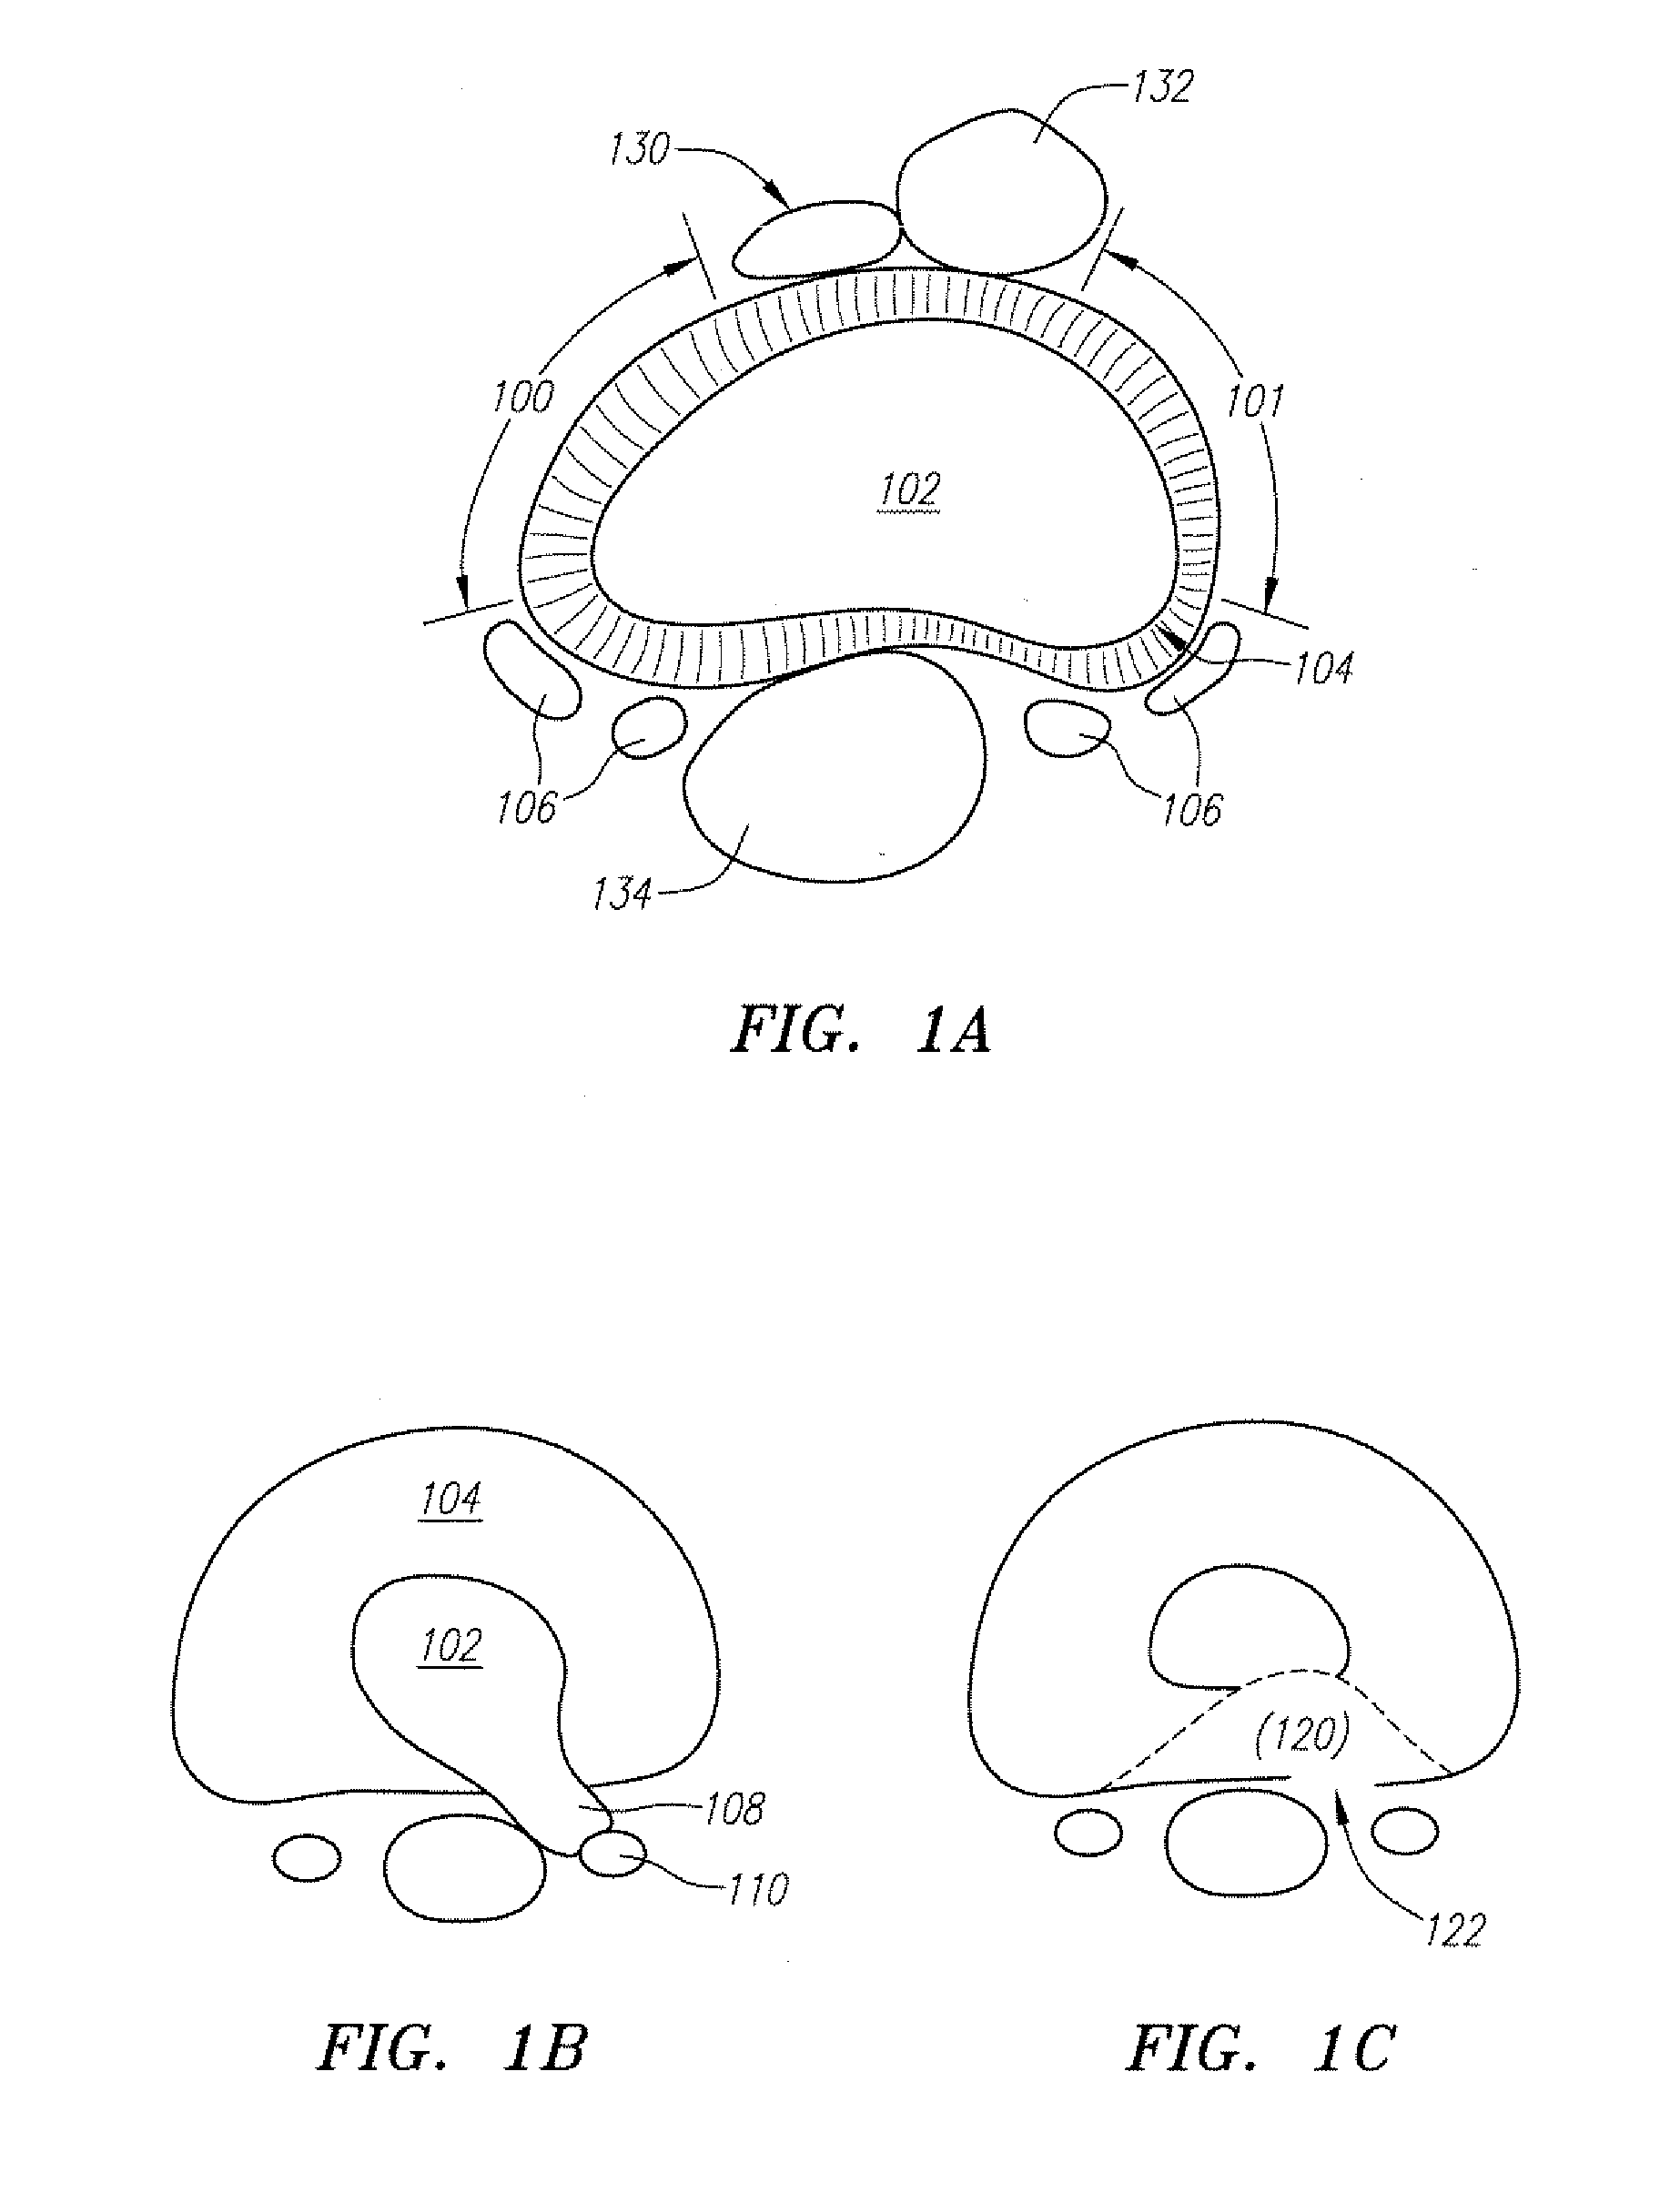 Devices used to treat disc herniation and attachment mechanisms therefore